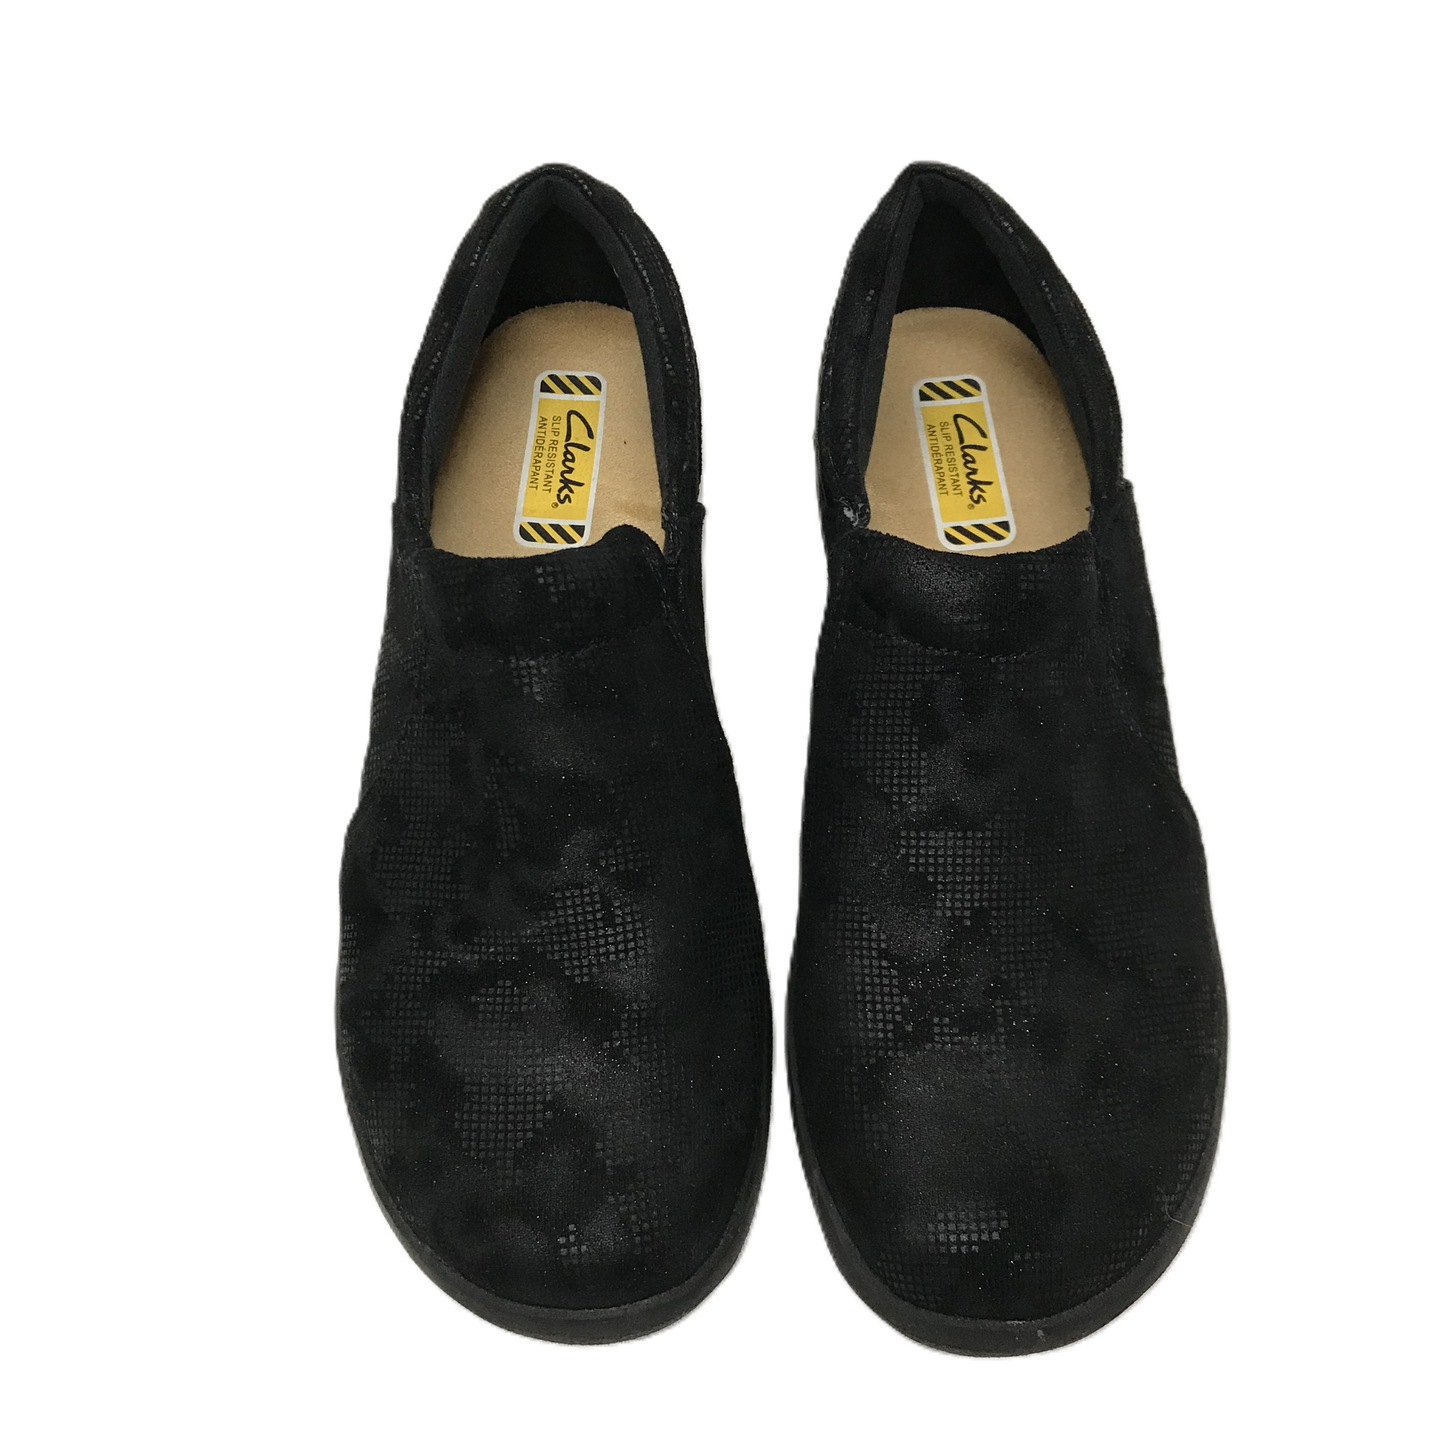 Black Shoes Flats By Clarks, Size: 7.5